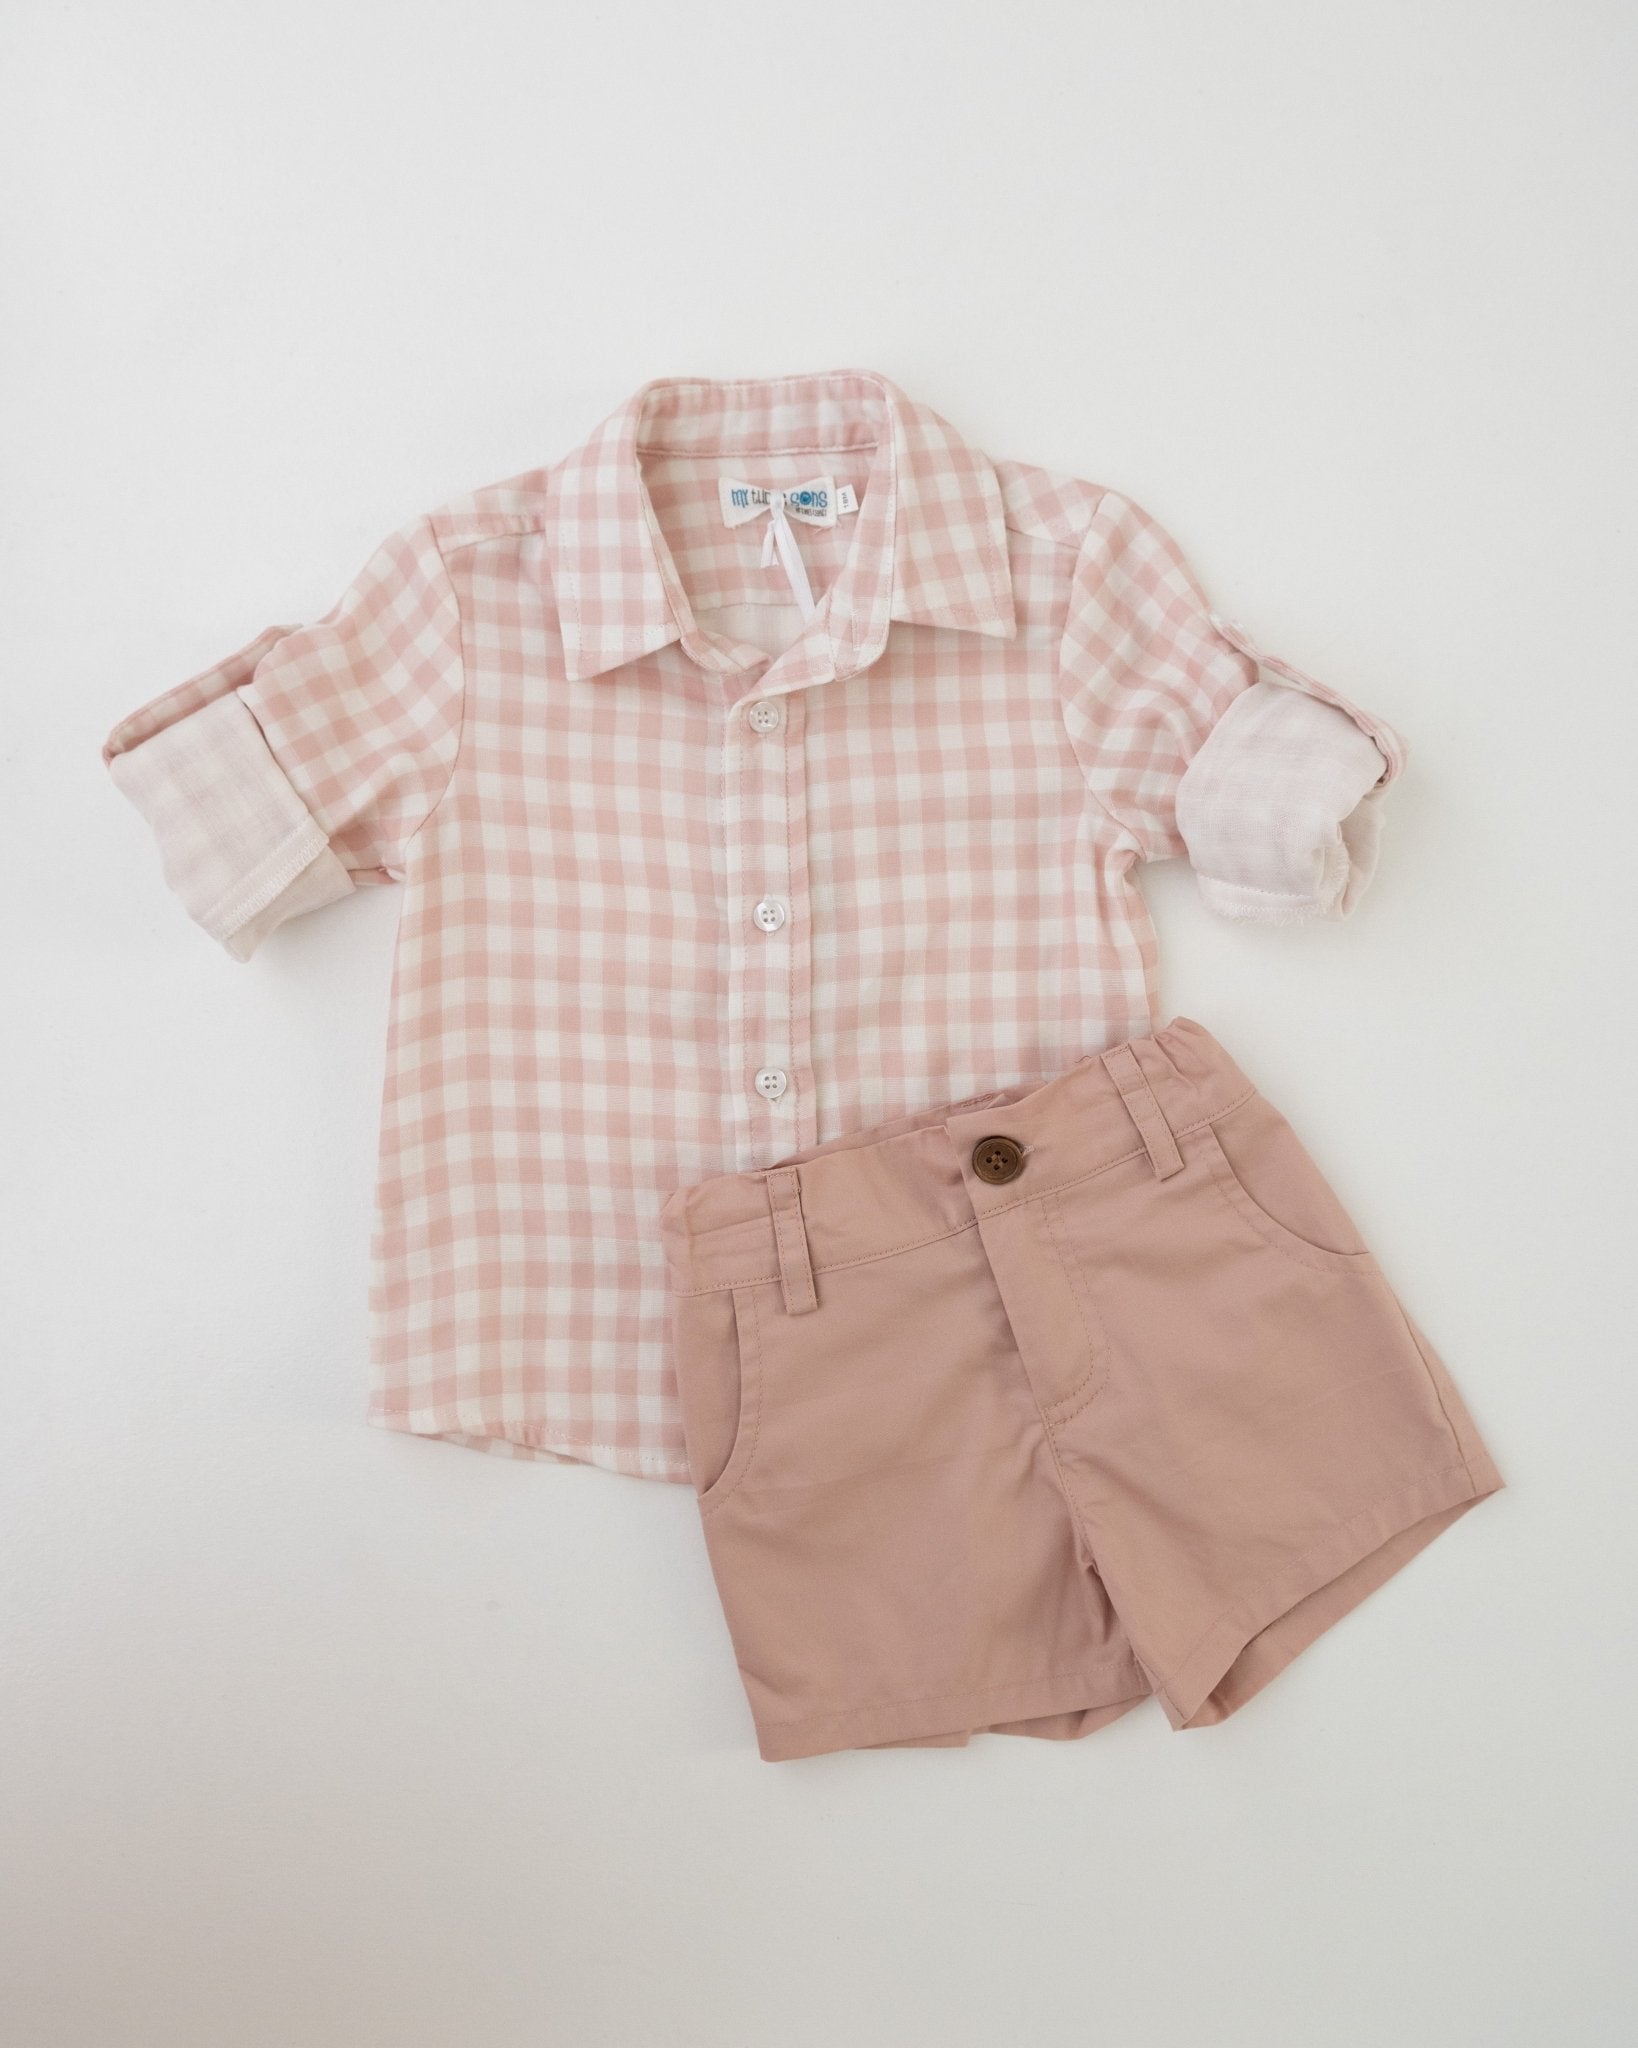 Pink Gingham Boys Shirt and Shorts - Evie's Closet Clothing